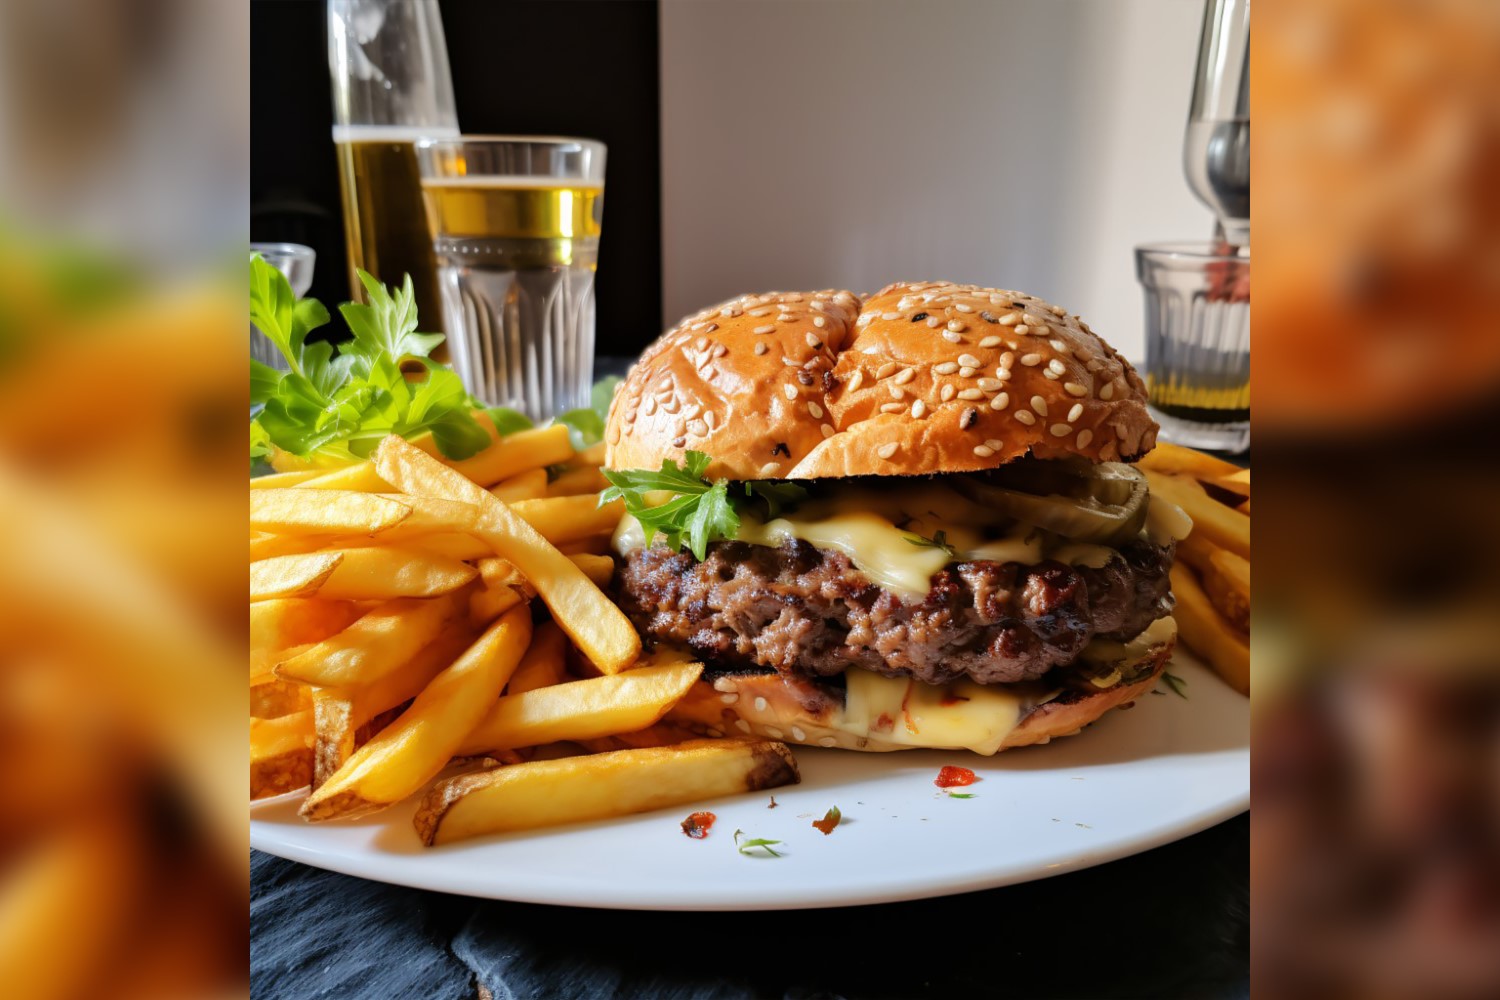 Beef burger with cheddar served with french fries 47